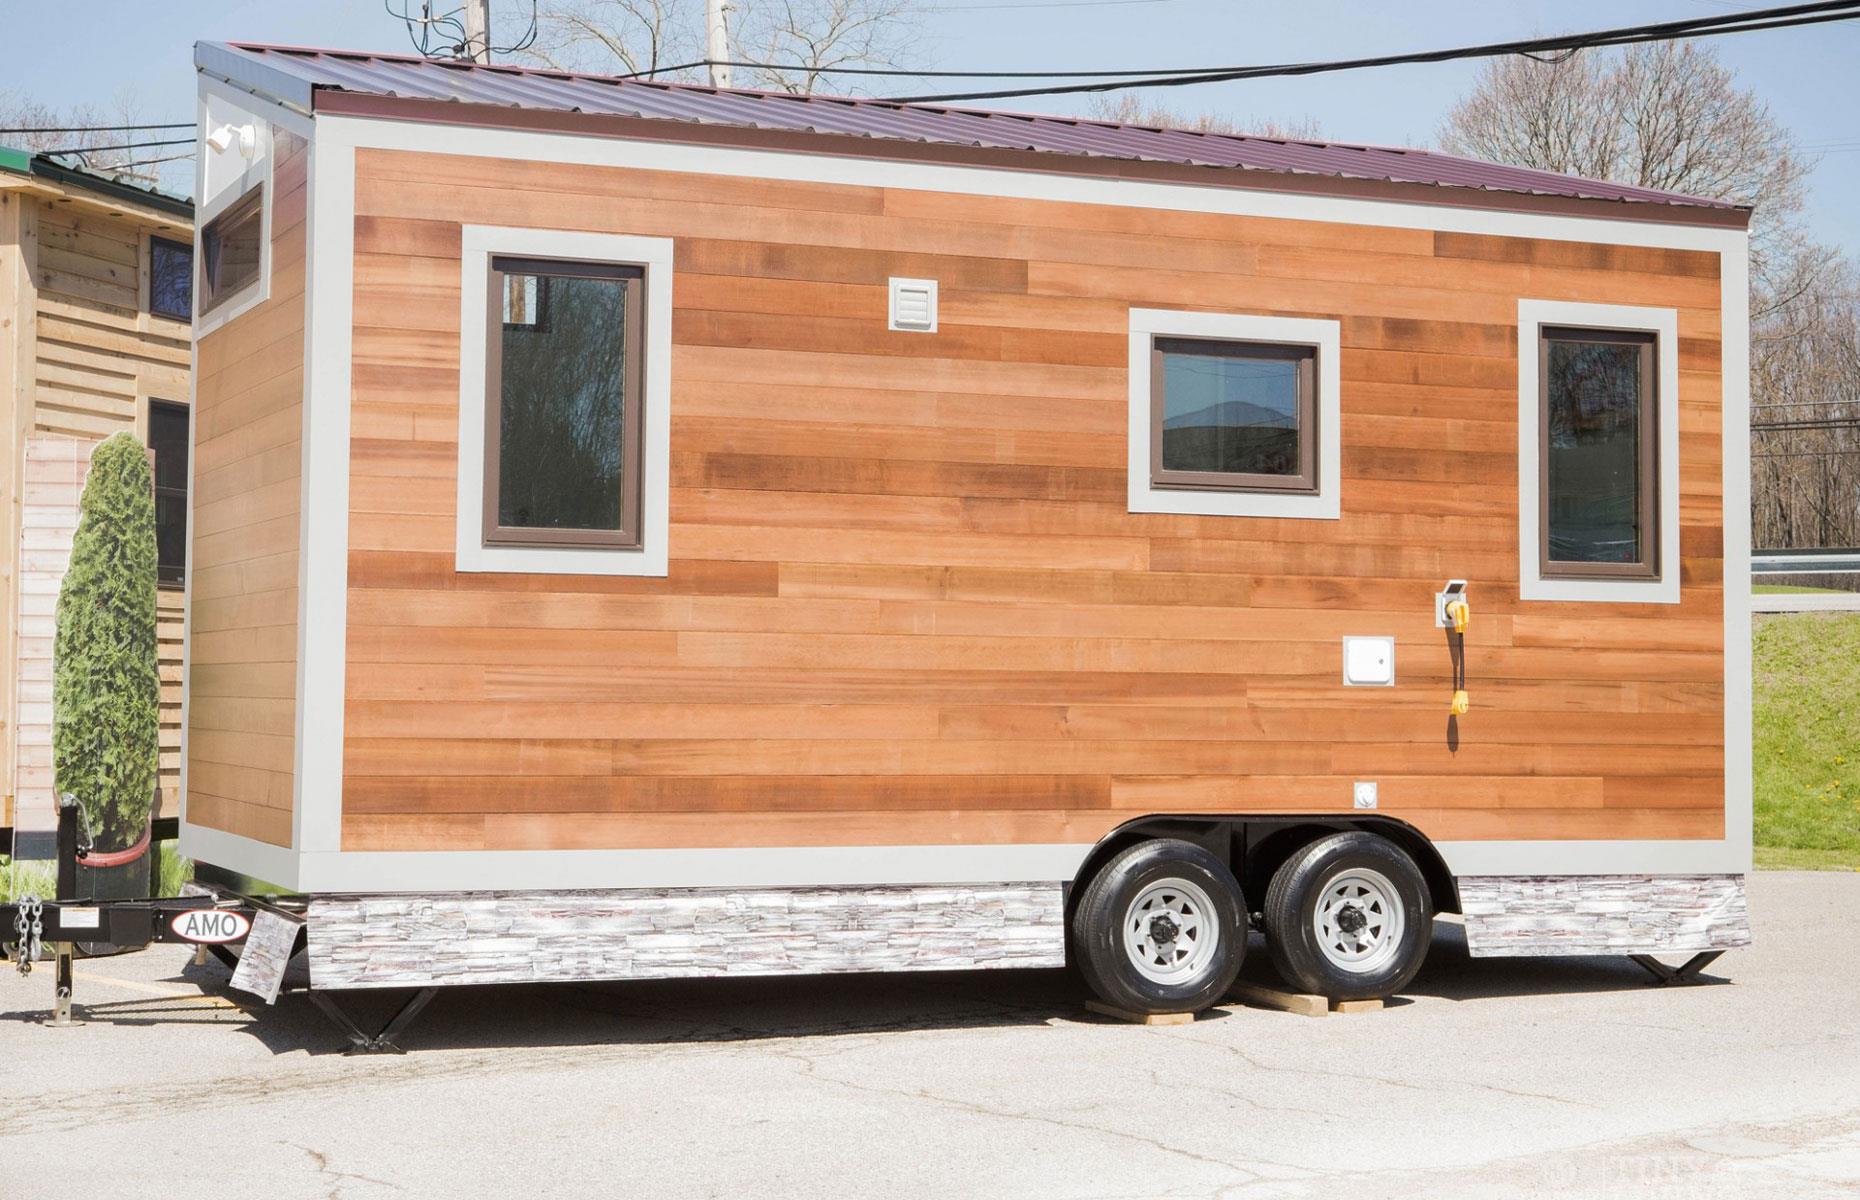 84 Lumber micro houses: from $49,884 (£34k)